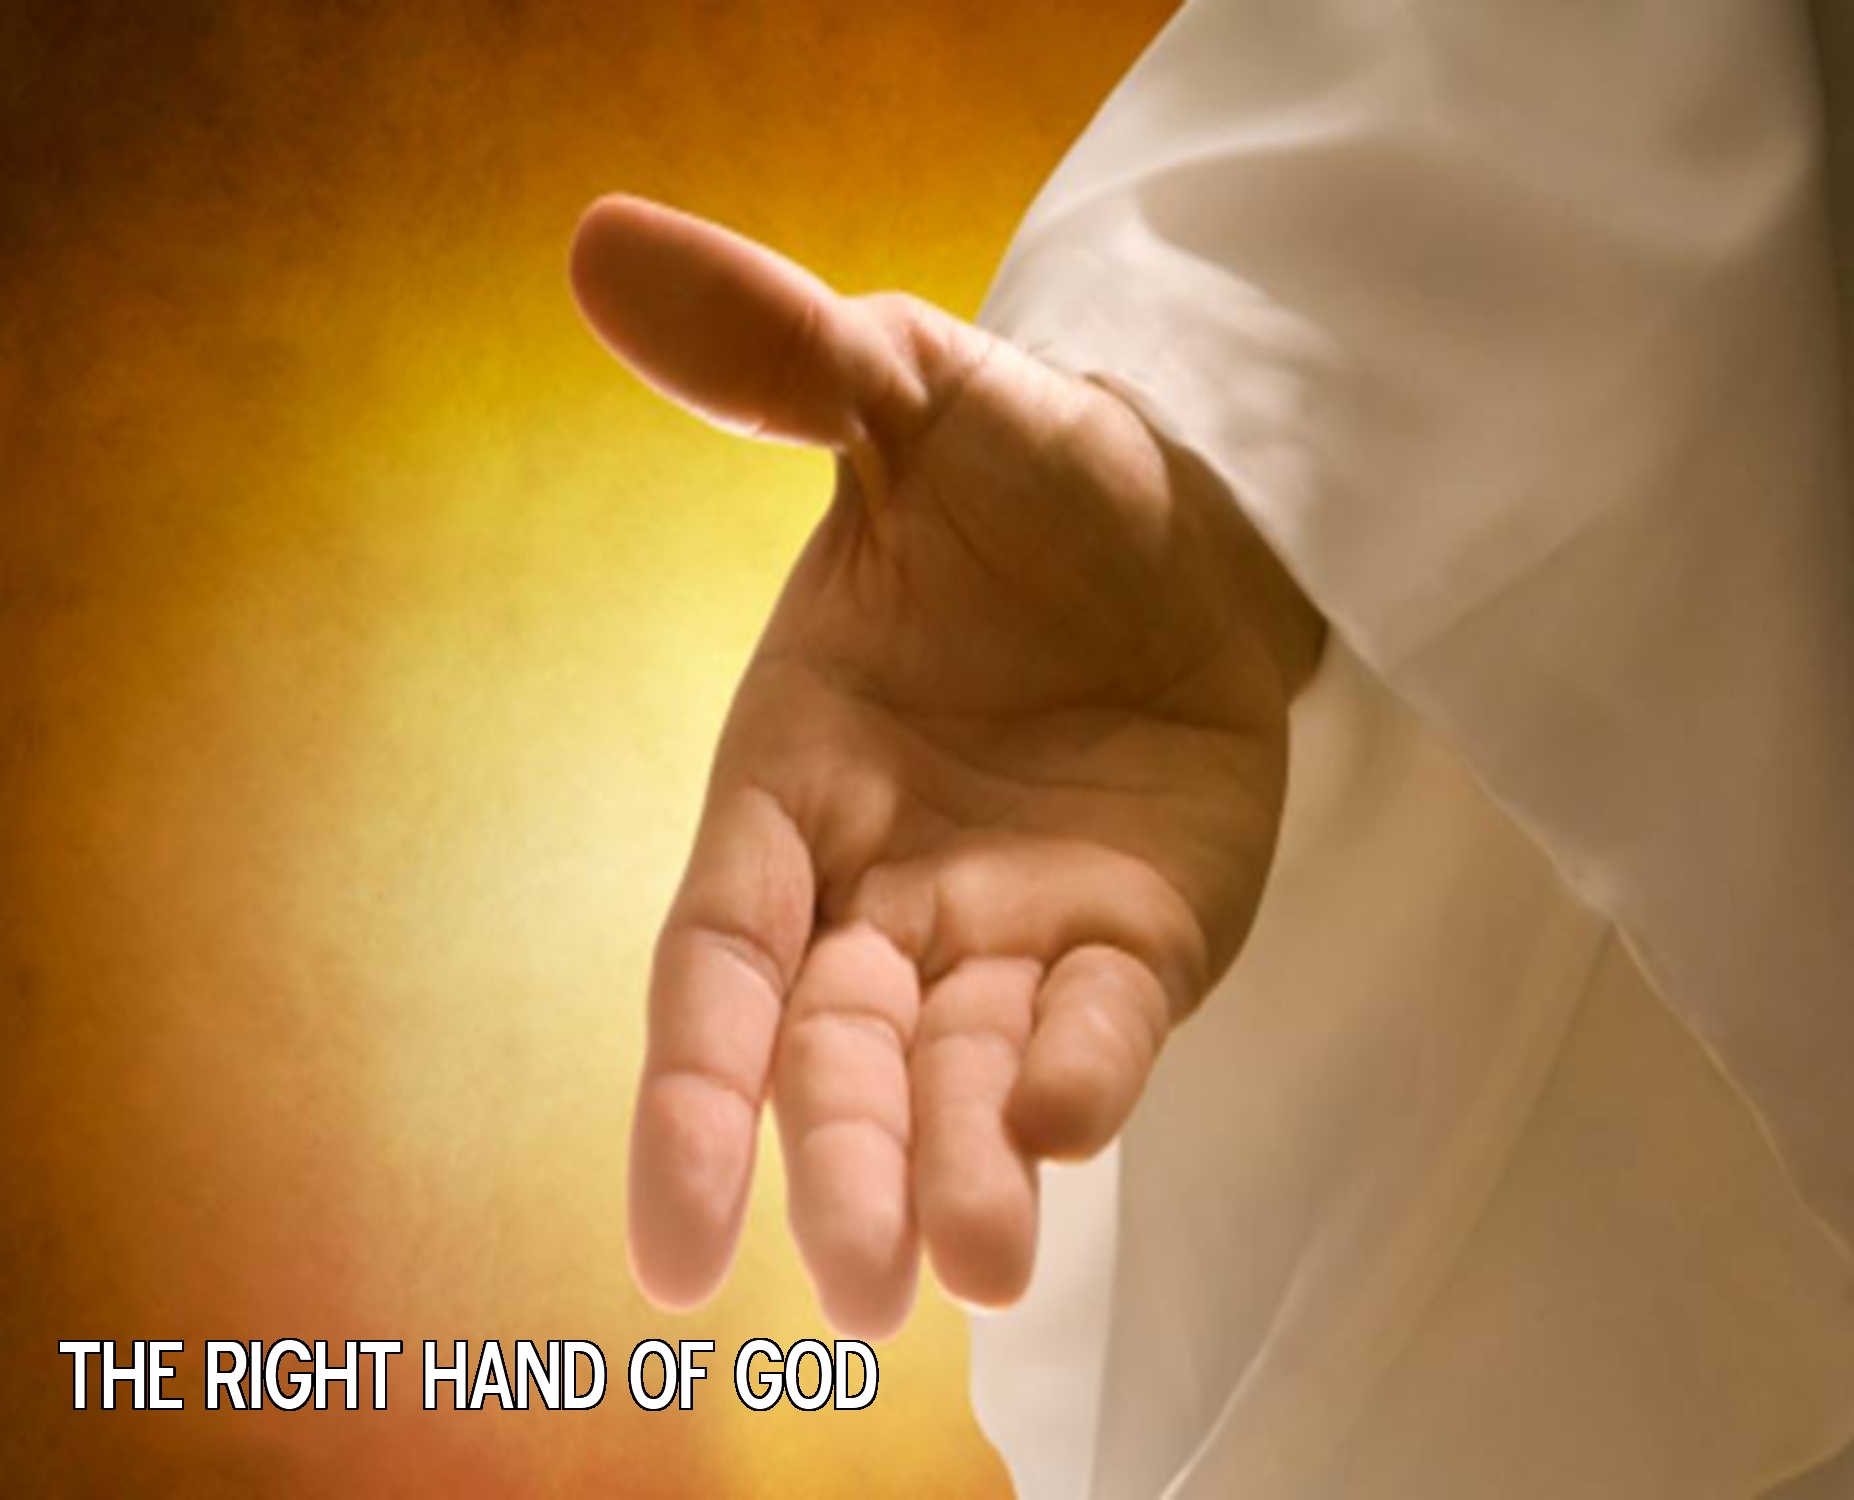 THE RIGHT HAND OF GOD (Psalm 63:8)